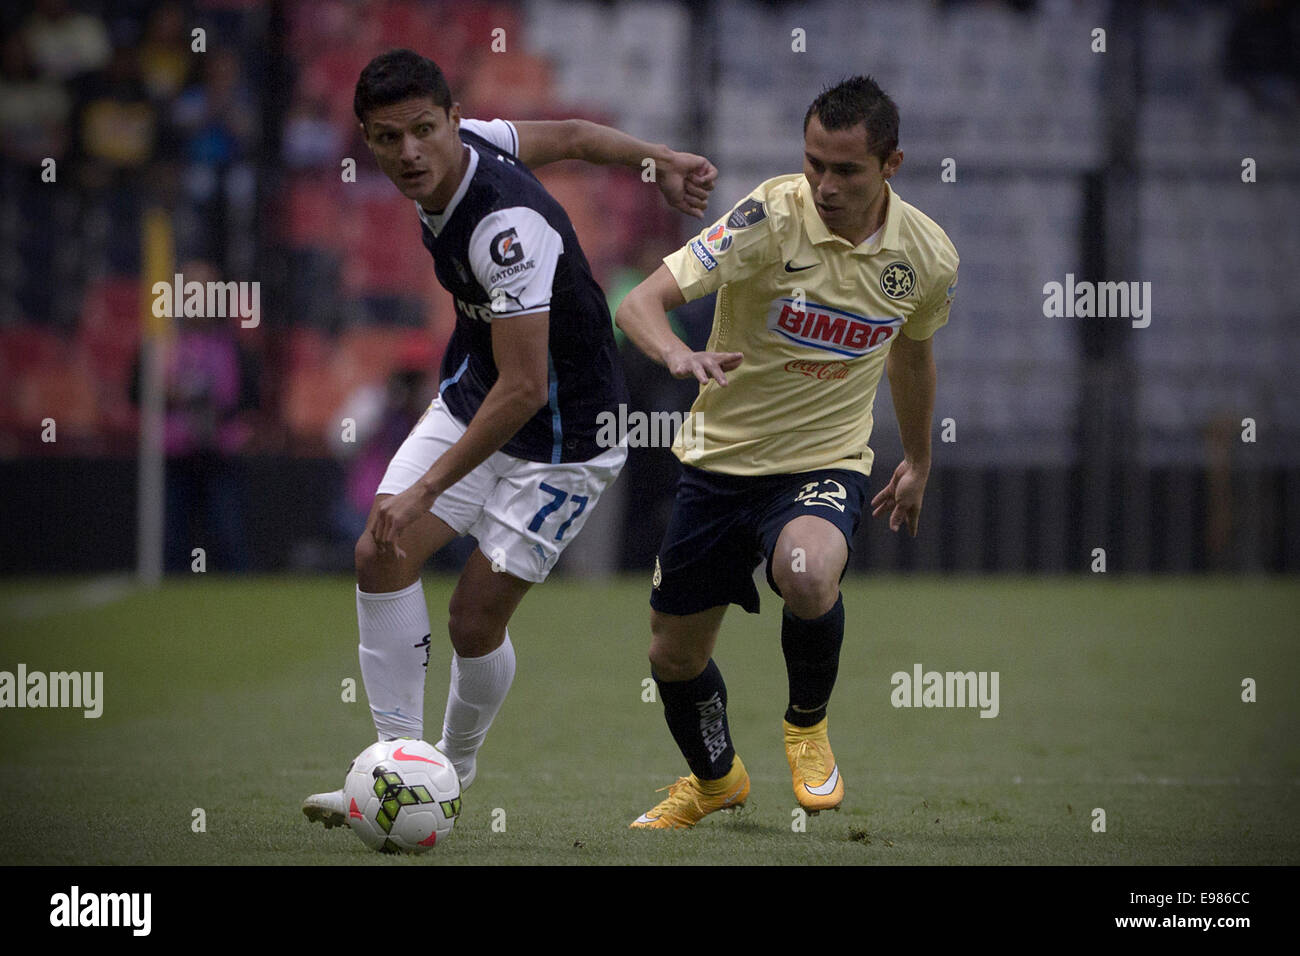 Mexico City, Mexico. 21st Oct, 2014. America's Paul Aguilar (R), vies for the ball with Guatemala's Comunicaciones Jairo Arreola (L) during a CONCACAF Champions League soccer match held at Estadio Azteca, in Mexico City, capital of Mexico, on Oct. 21, 2014. © Alejandro Ayala/Xinhua/Alamy Live News Stock Photo